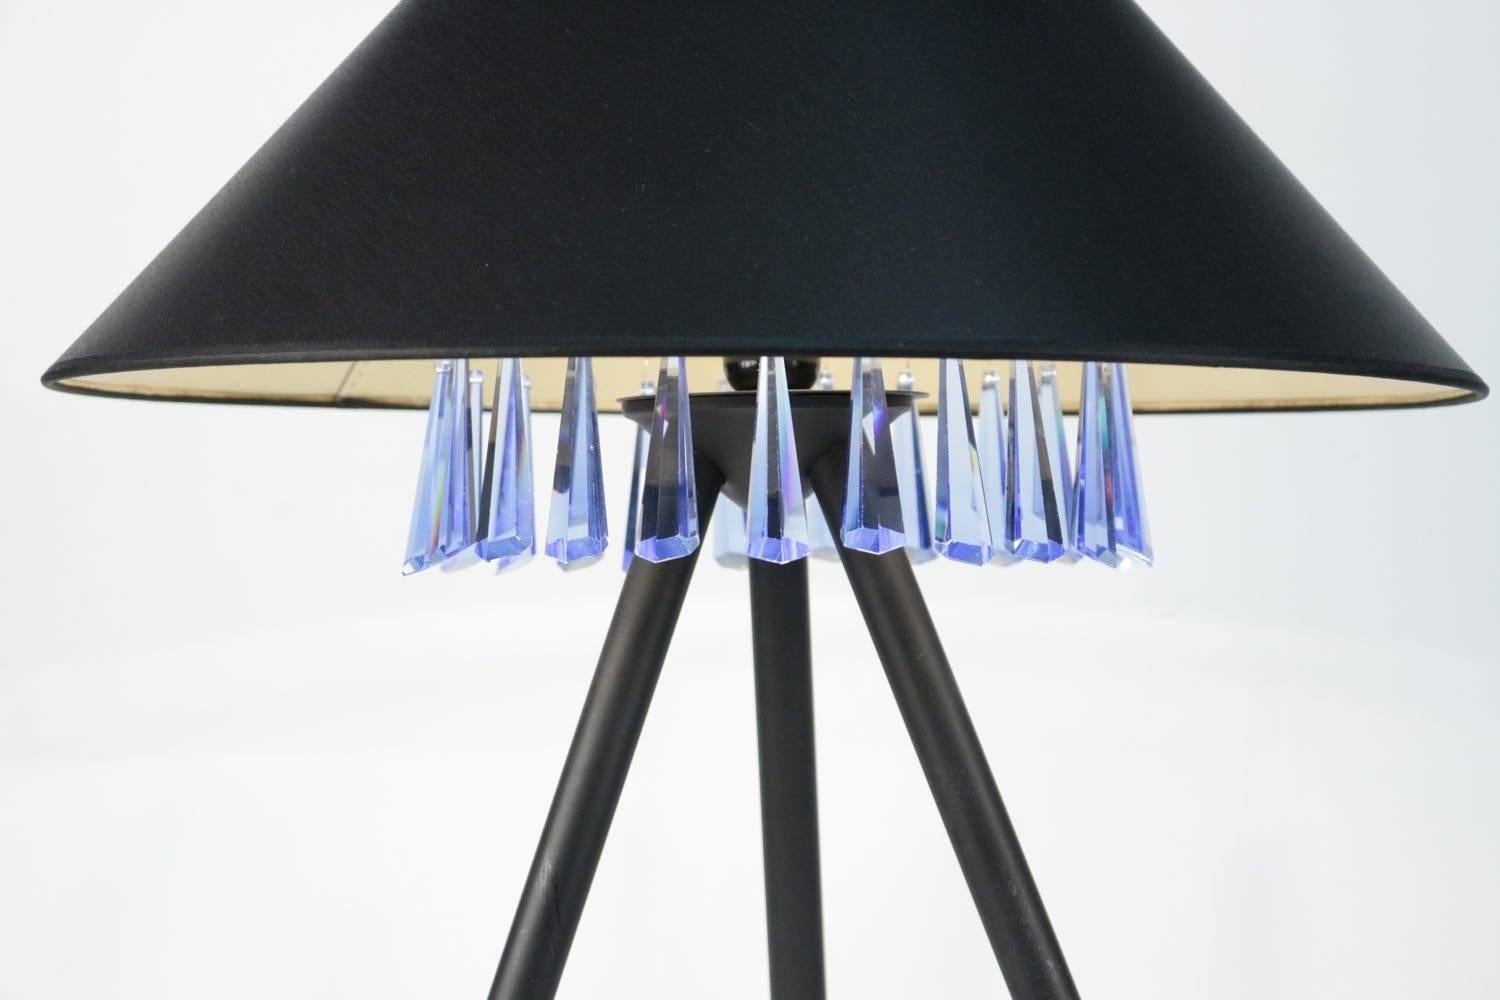 1970s table lamp for Galerie Chrystiane Charles, 1970.
Referenced on the catalog.
Black lacquered metal base with brass ball endings. 
Tripod base. Frieze with a pearl decor holding blue glass daggers.
Gold inside color and black outside